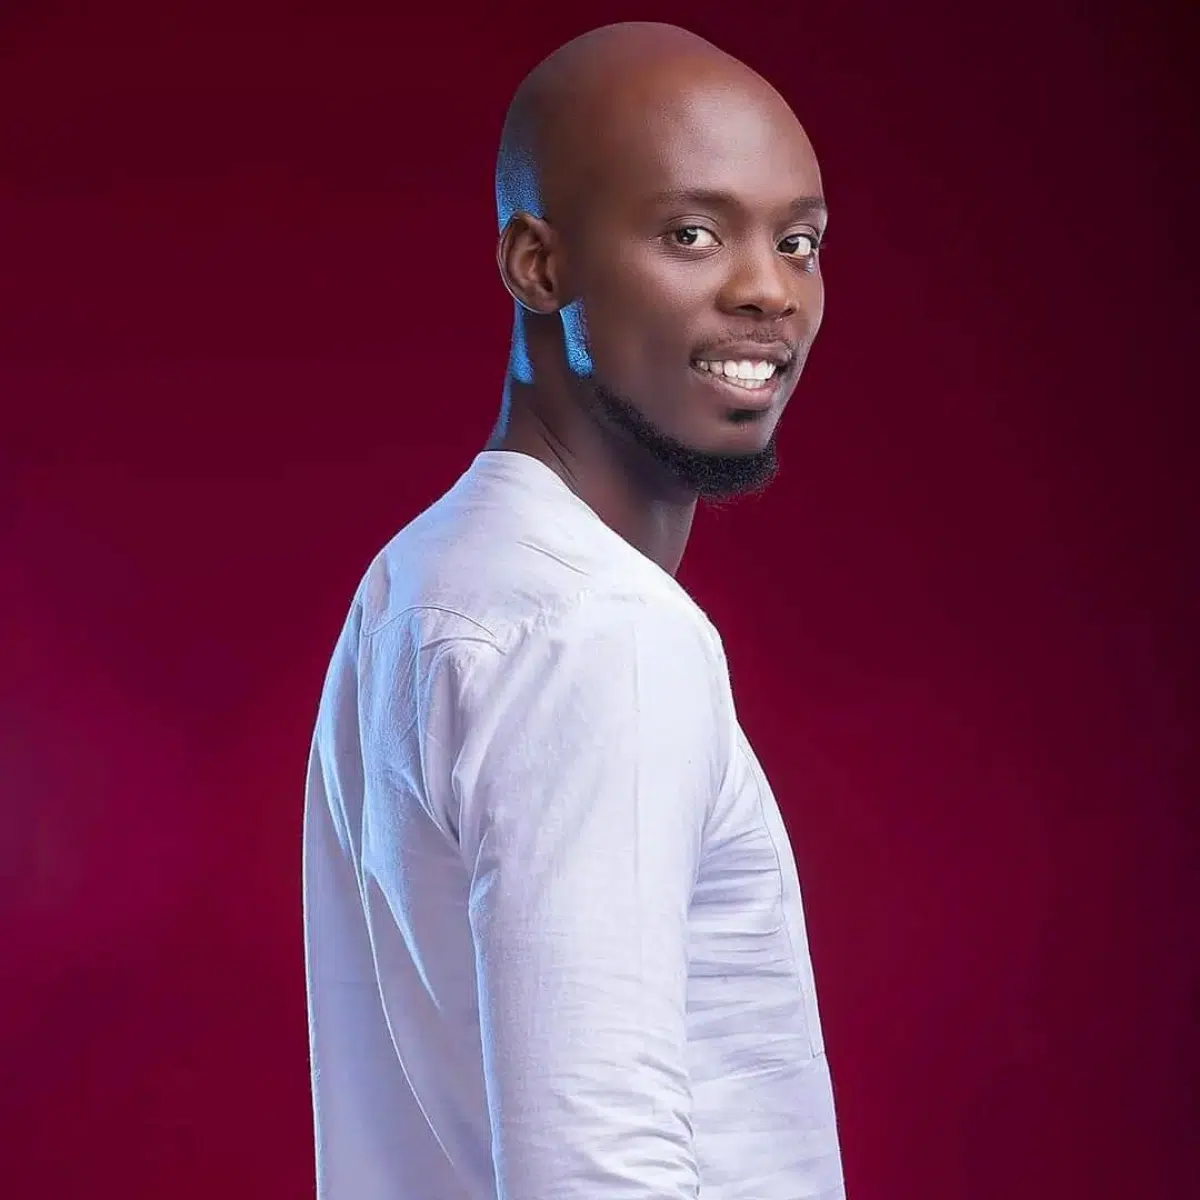 DOWNLOAD: Pompi – “Simplified” Mp3